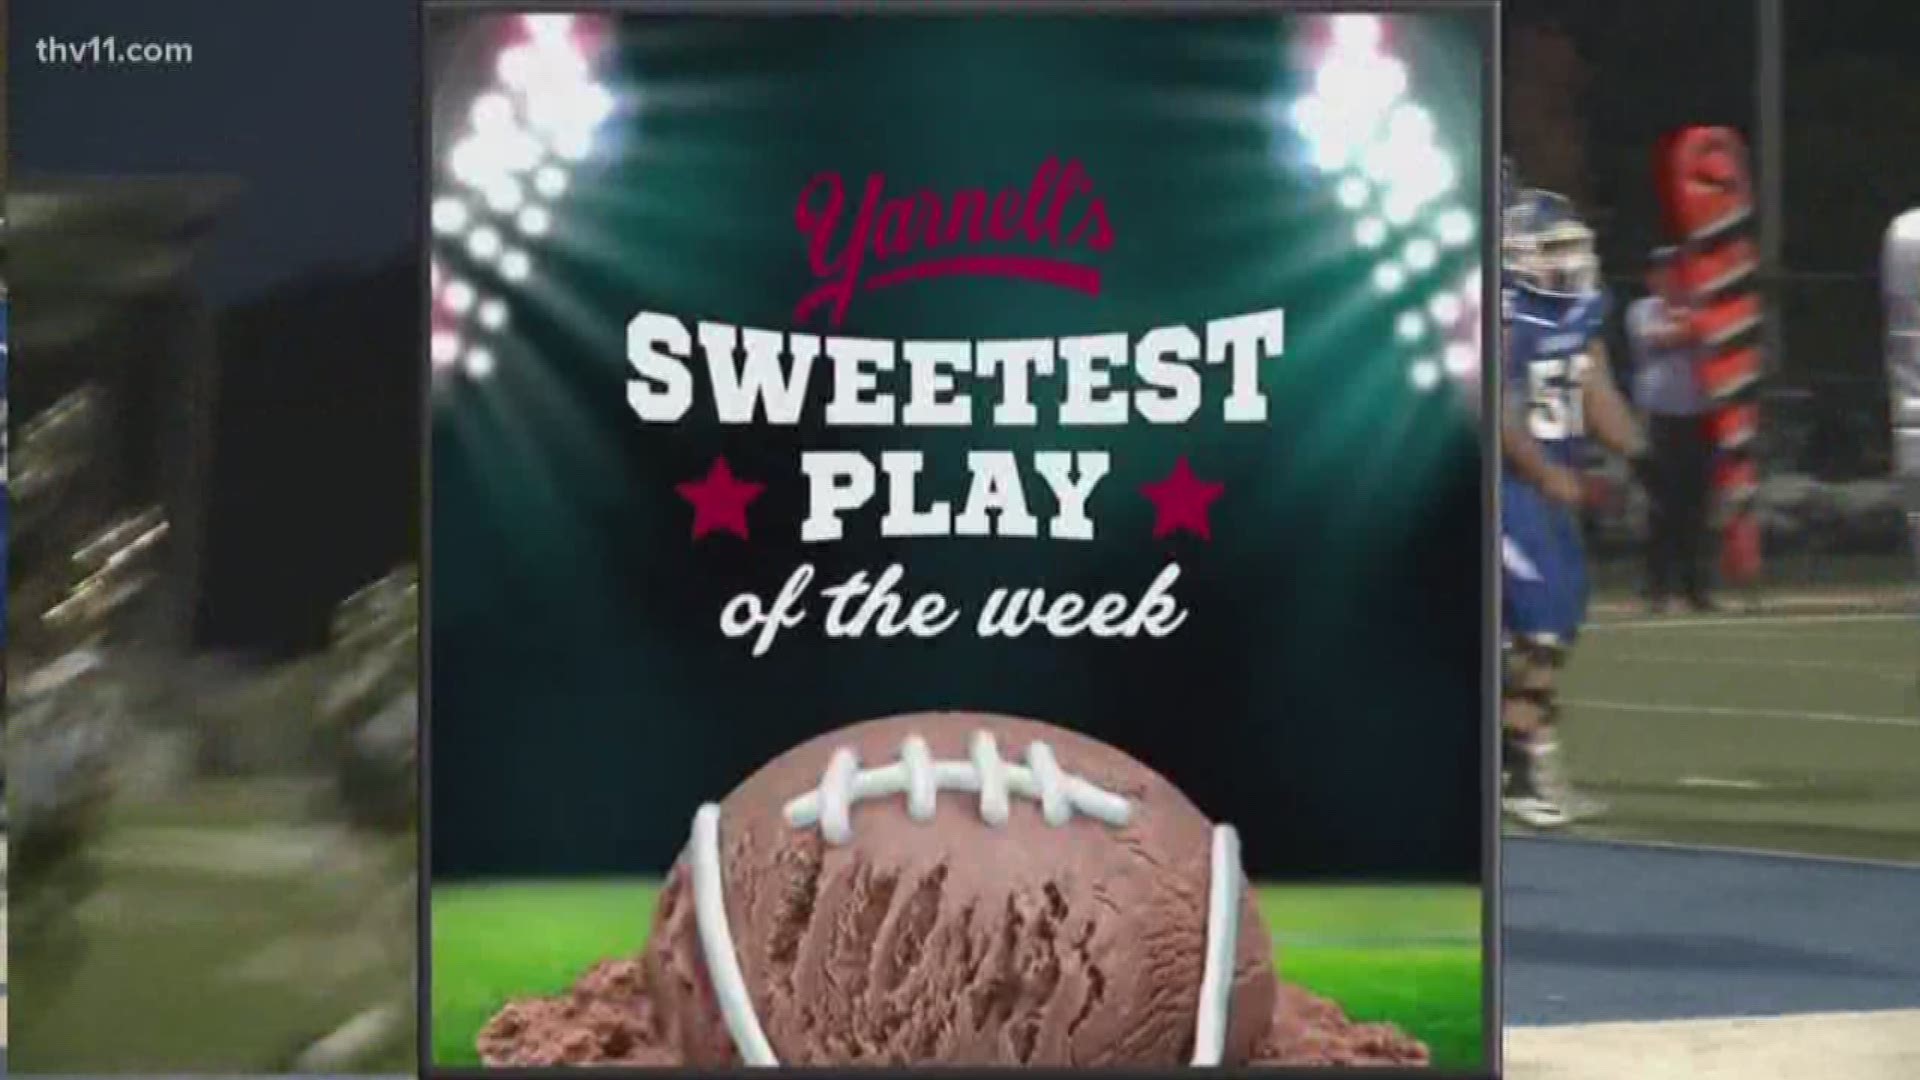 The Little Rock Christian Warriors won an ice cream party courtesy of Yarnell's thanks to senior running back, Kendel Givens, winning the Sweetest Play of the Week